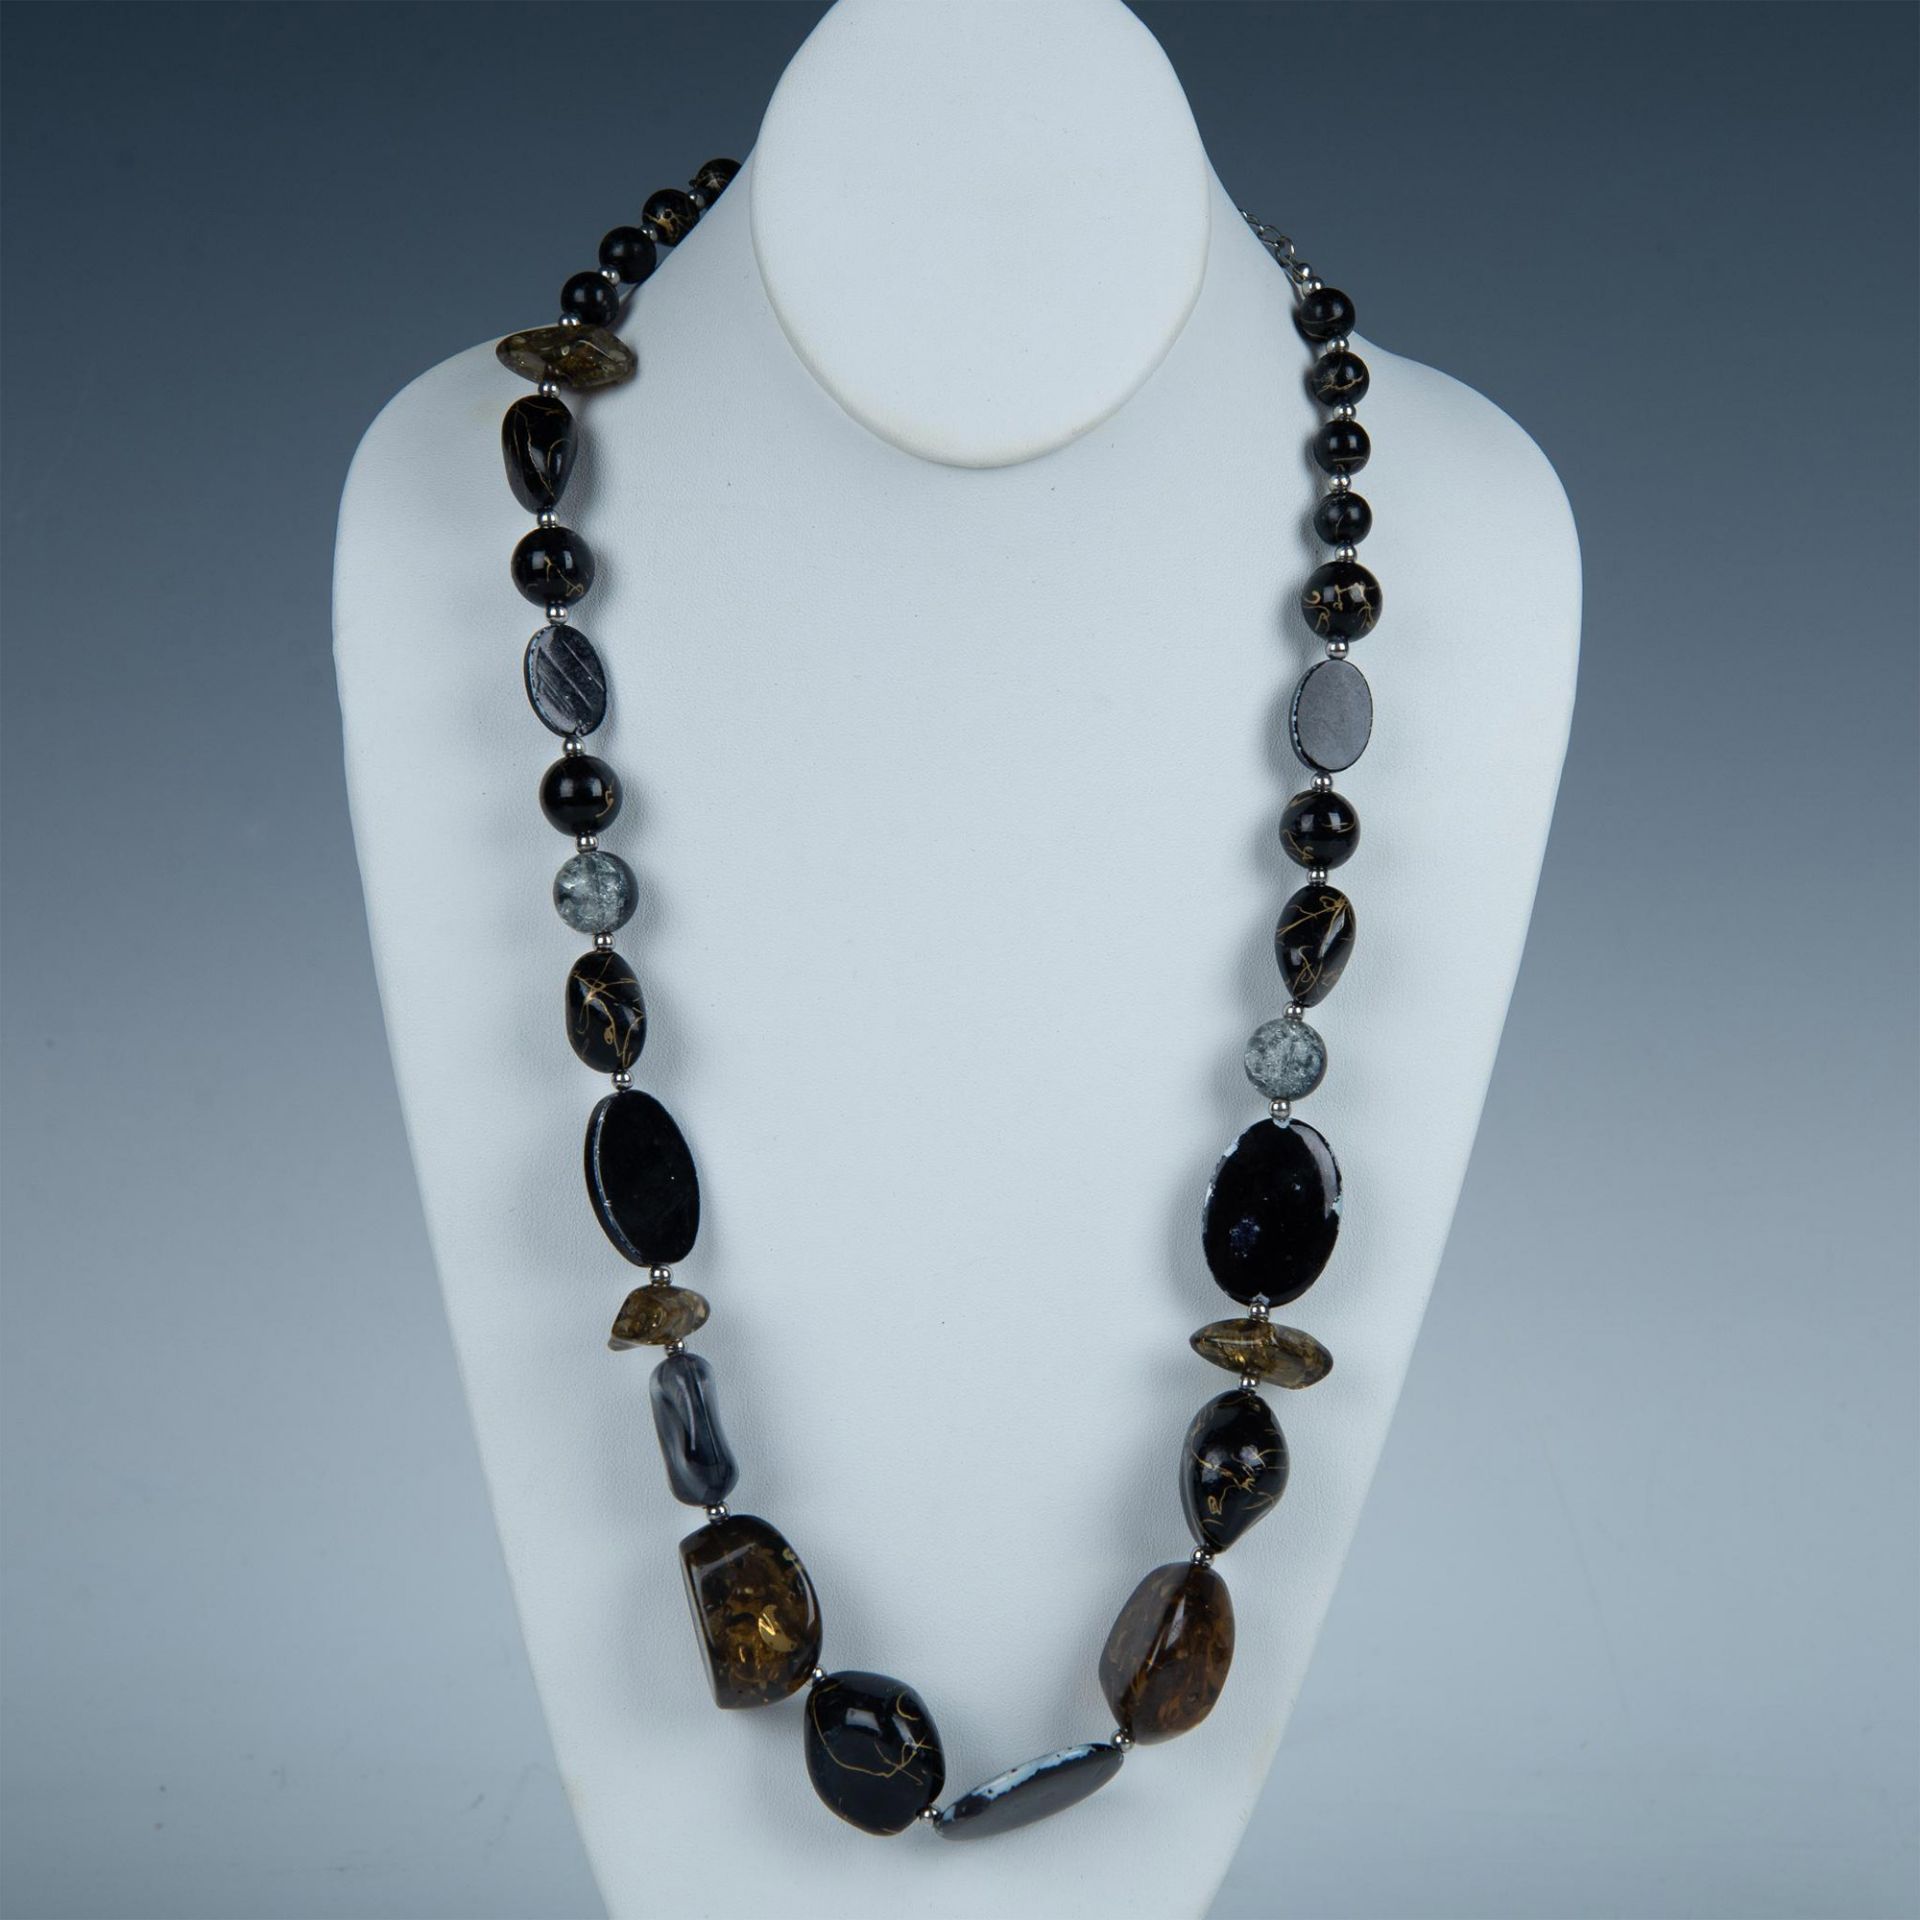 Gorgeous Faux Amber and Black Bead Necklace